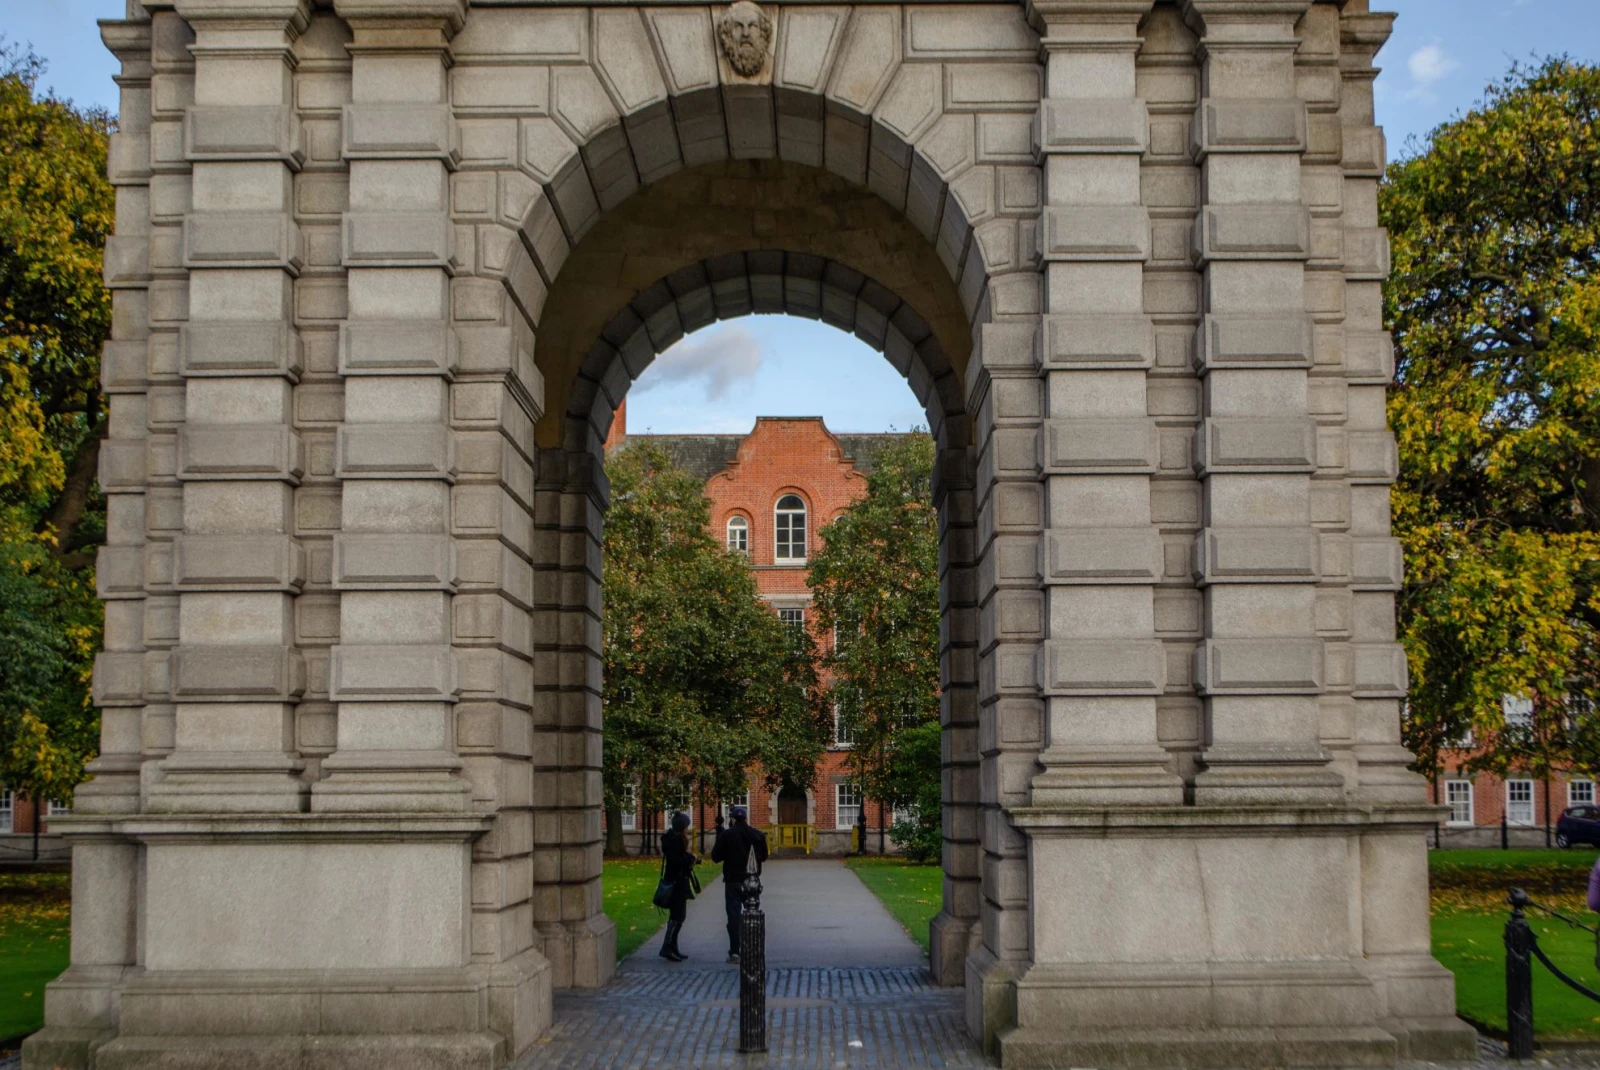 View of an Arch at Trinity College, Dublin
